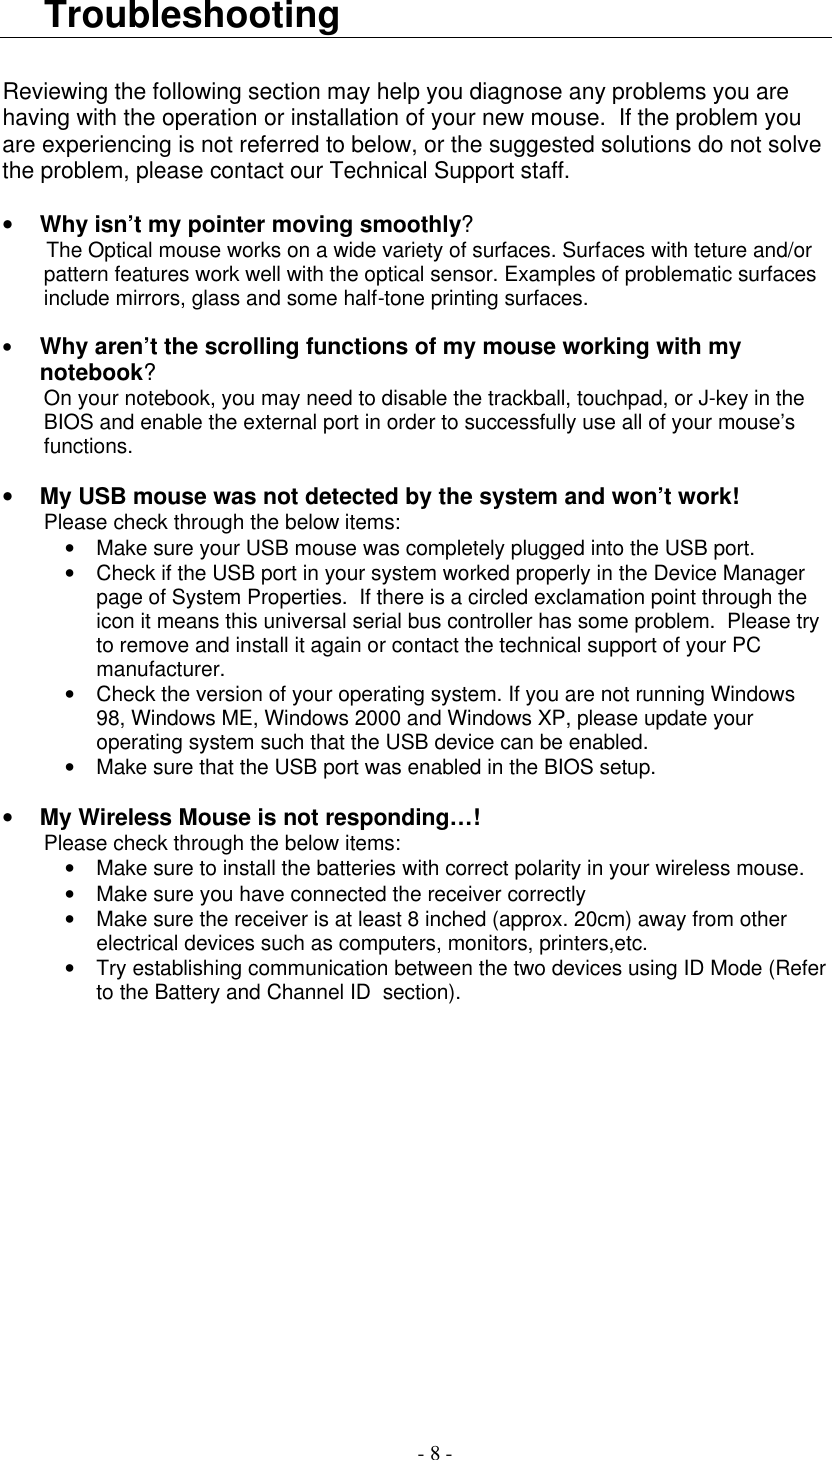   - 8 - Troubleshooting  Reviewing the following section may help you diagnose any problems you are having with the operation or installation of your new mouse.  If the problem you are experiencing is not referred to below, or the suggested solutions do not solve the problem, please contact our Technical Support staff.    • Why isn’t my pointer moving smoothly? The Optical mouse works on a wide variety of surfaces. Surfaces with teture and/or pattern features work well with the optical sensor. Examples of problematic surfaces include mirrors, glass and some half-tone printing surfaces.  • Why aren’t the scrolling functions of my mouse working with my notebook? On your notebook, you may need to disable the trackball, touchpad, or J-key in the BIOS and enable the external port in order to successfully use all of your mouse’s functions.  • My USB mouse was not detected by the system and won’t work! Please check through the below items: • Make sure your USB mouse was completely plugged into the USB port. • Check if the USB port in your system worked properly in the Device Manager page of System Properties.  If there is a circled exclamation point through the icon it means this universal serial bus controller has some problem.  Please try to remove and install it again or contact the technical support of your PC manufacturer. • Check the version of your operating system. If you are not running Windows 98, Windows ME, Windows 2000 and Windows XP, please update your operating system such that the USB device can be enabled. • Make sure that the USB port was enabled in the BIOS setup.  • My Wireless Mouse is not responding… ! Please check through the below items: • Make sure to install the batteries with correct polarity in your wireless mouse. • Make sure you have connected the receiver correctly • Make sure the receiver is at least 8 inched (approx. 20cm) away from other electrical devices such as computers, monitors, printers,etc. • Try establishing communication between the two devices using ID Mode (Refer to the Battery and Channel ID  section).      